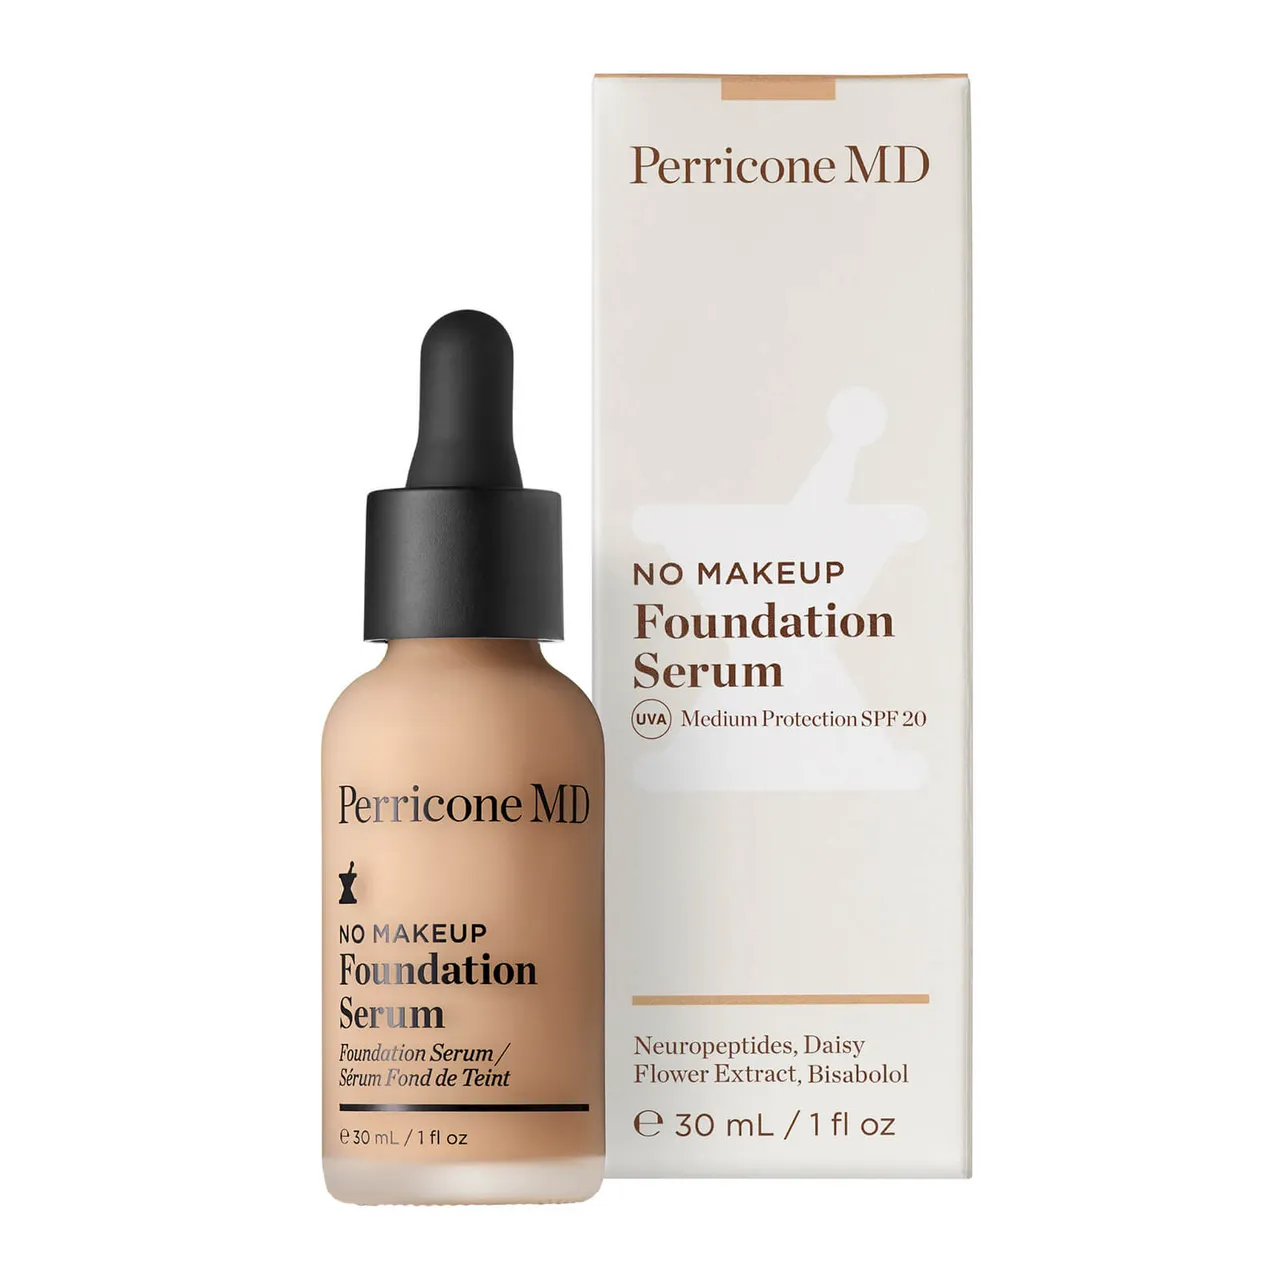 Perricone MD No Makeup Foundation Serum SPF 20 30ml (Various Shades) - 2 Ivory